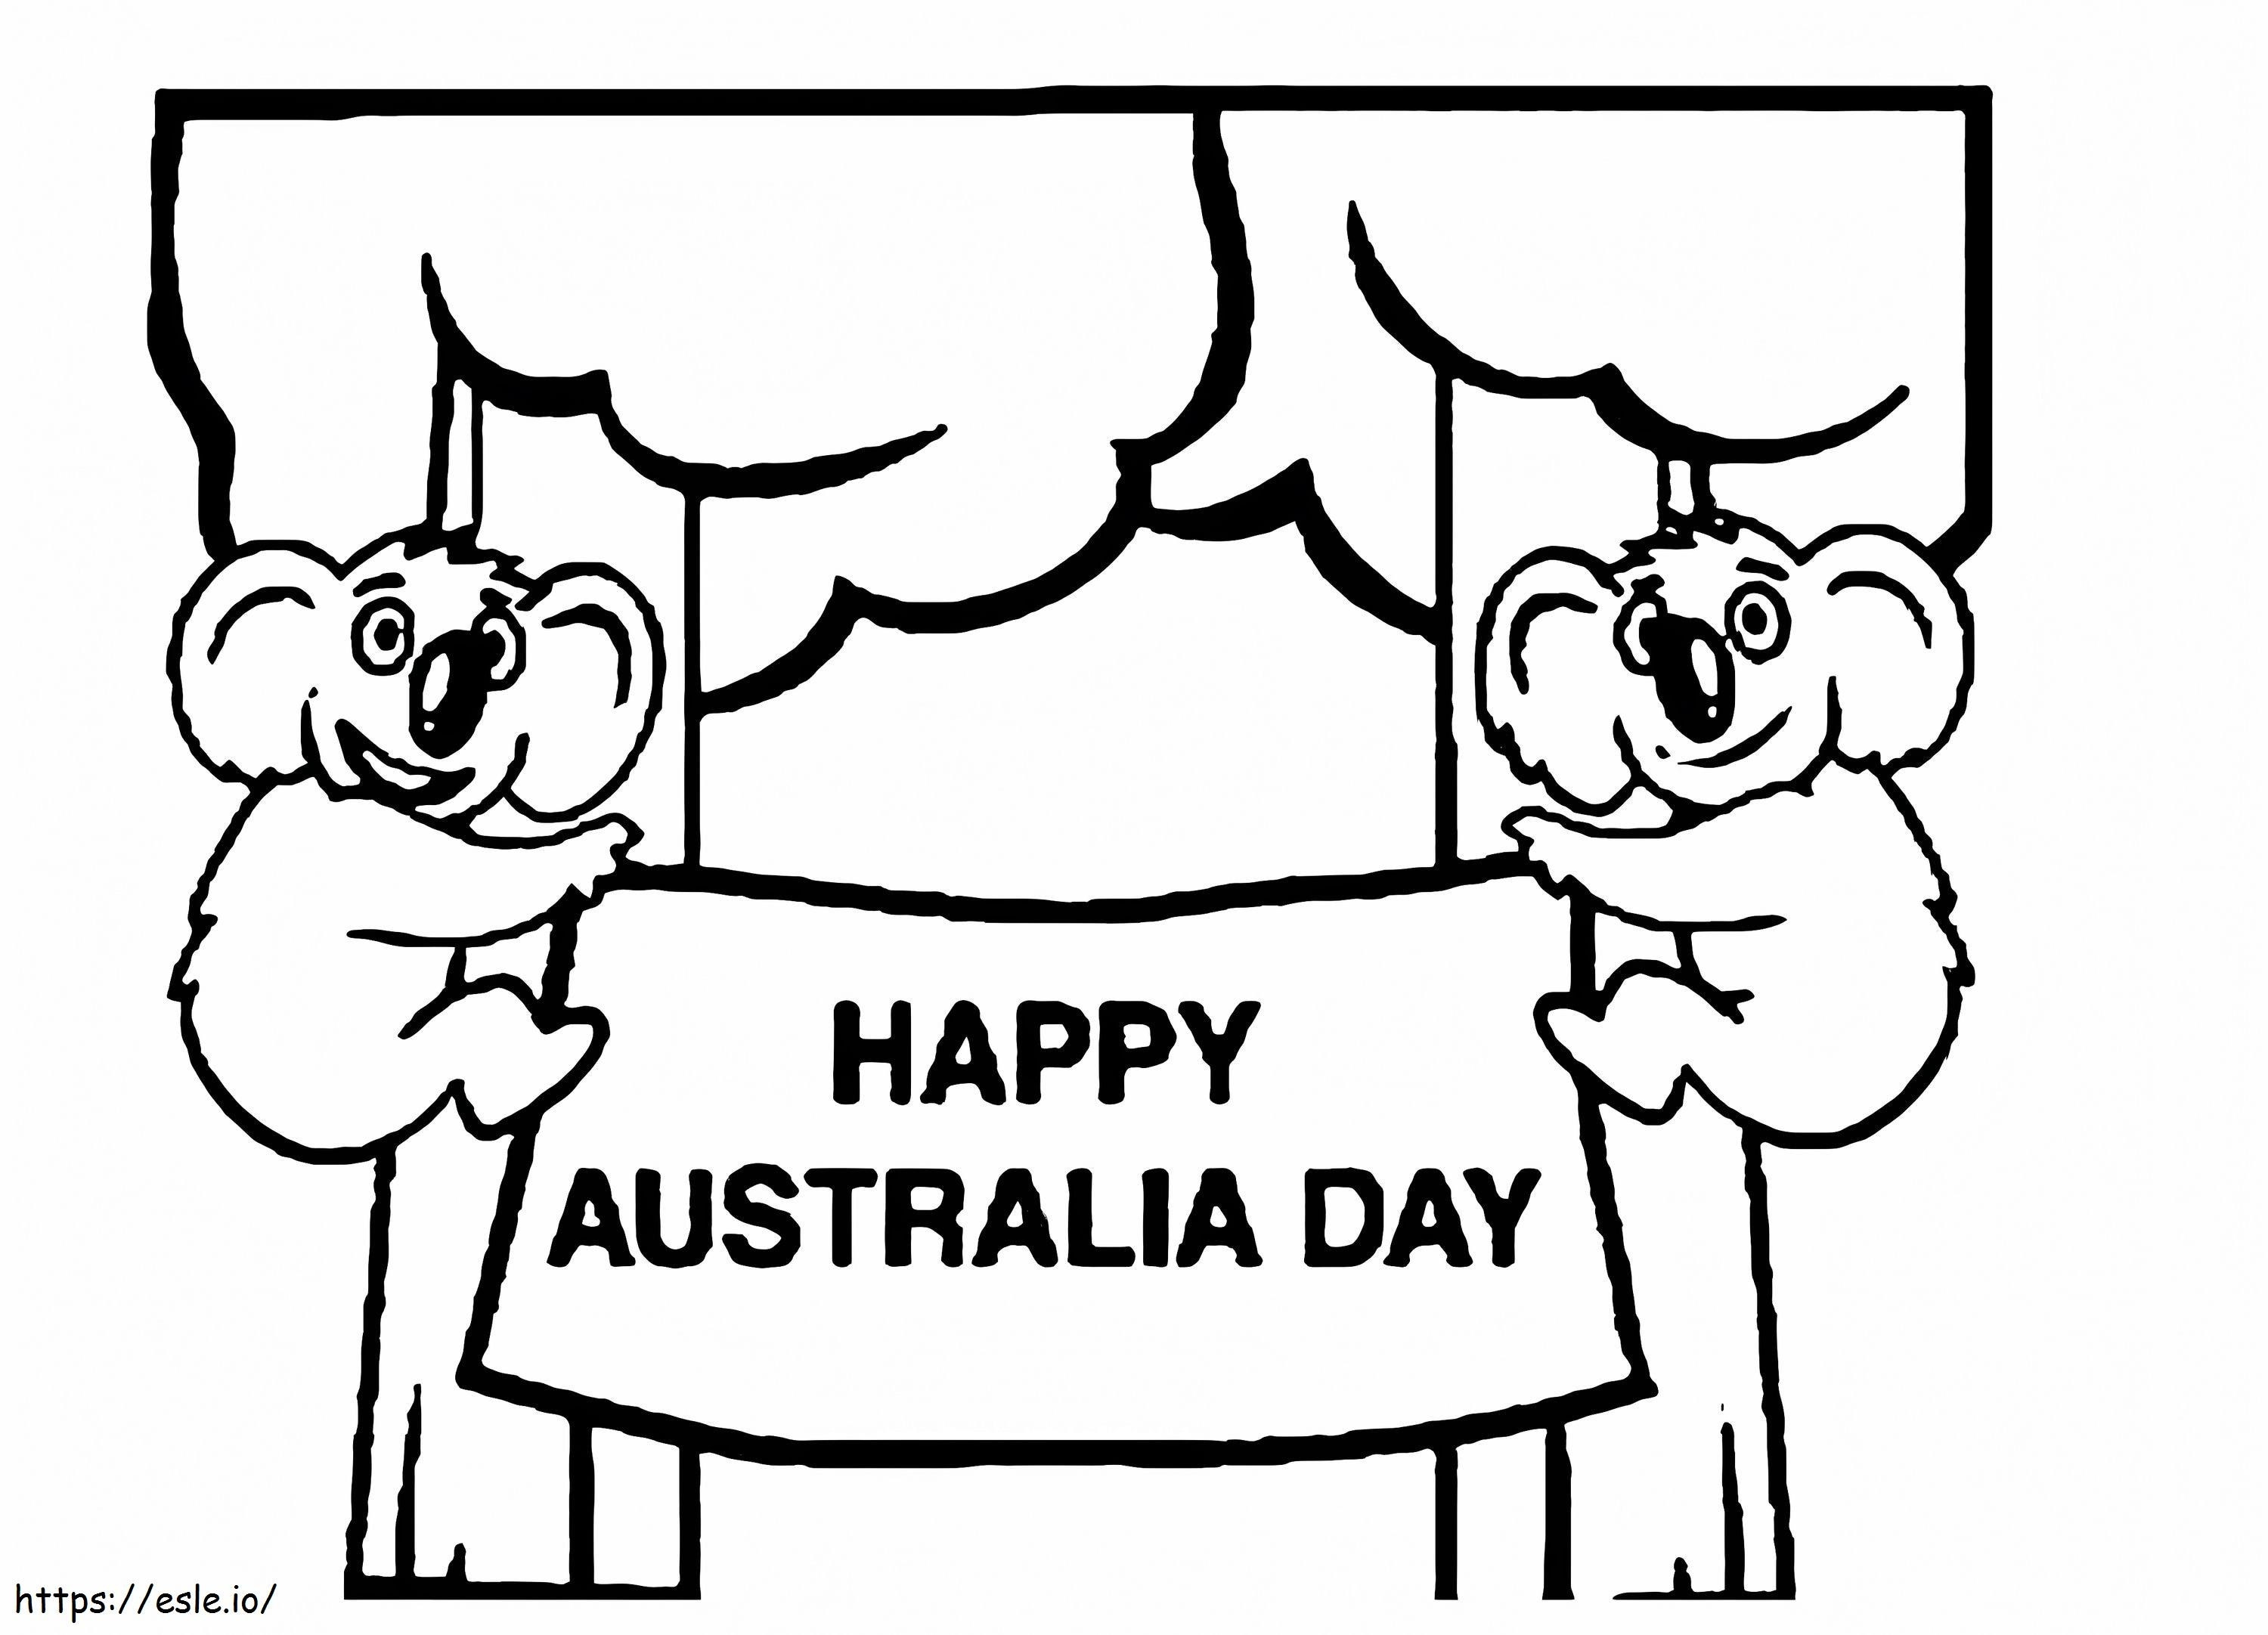 Happy Australia Day 1 coloring page